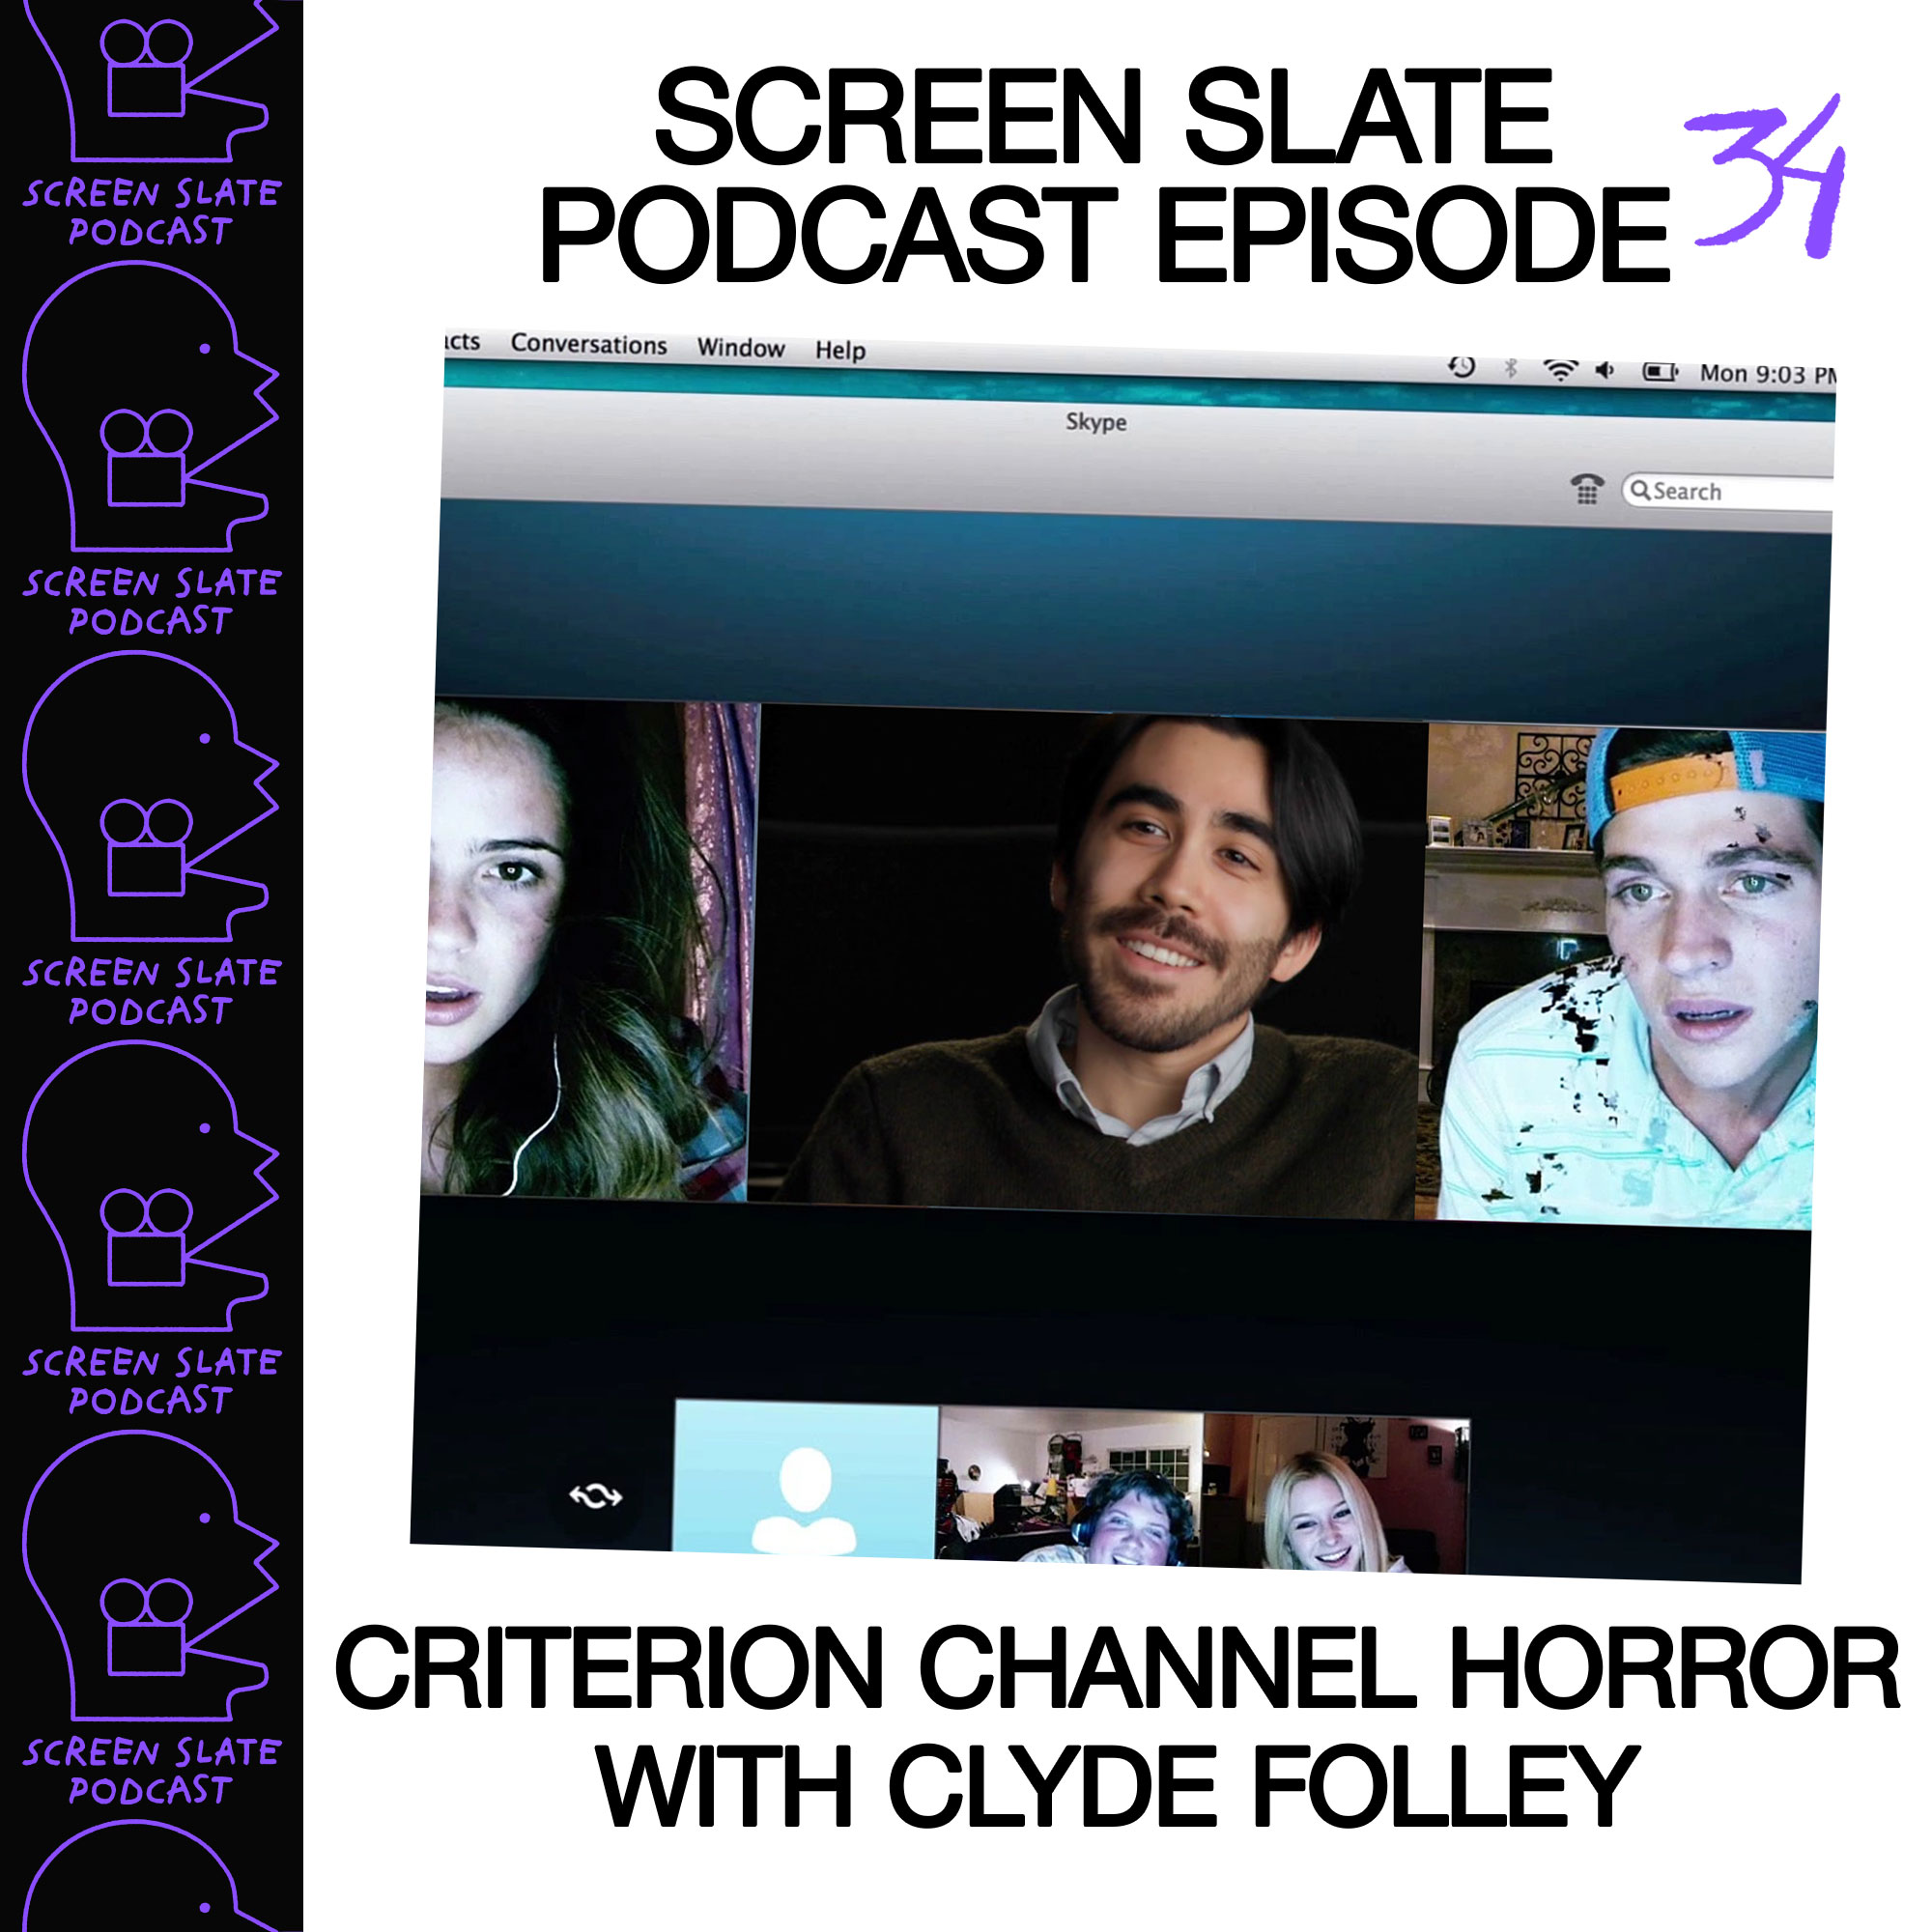 Episode 34 - Criterion Channel Horror with Clyde Folley